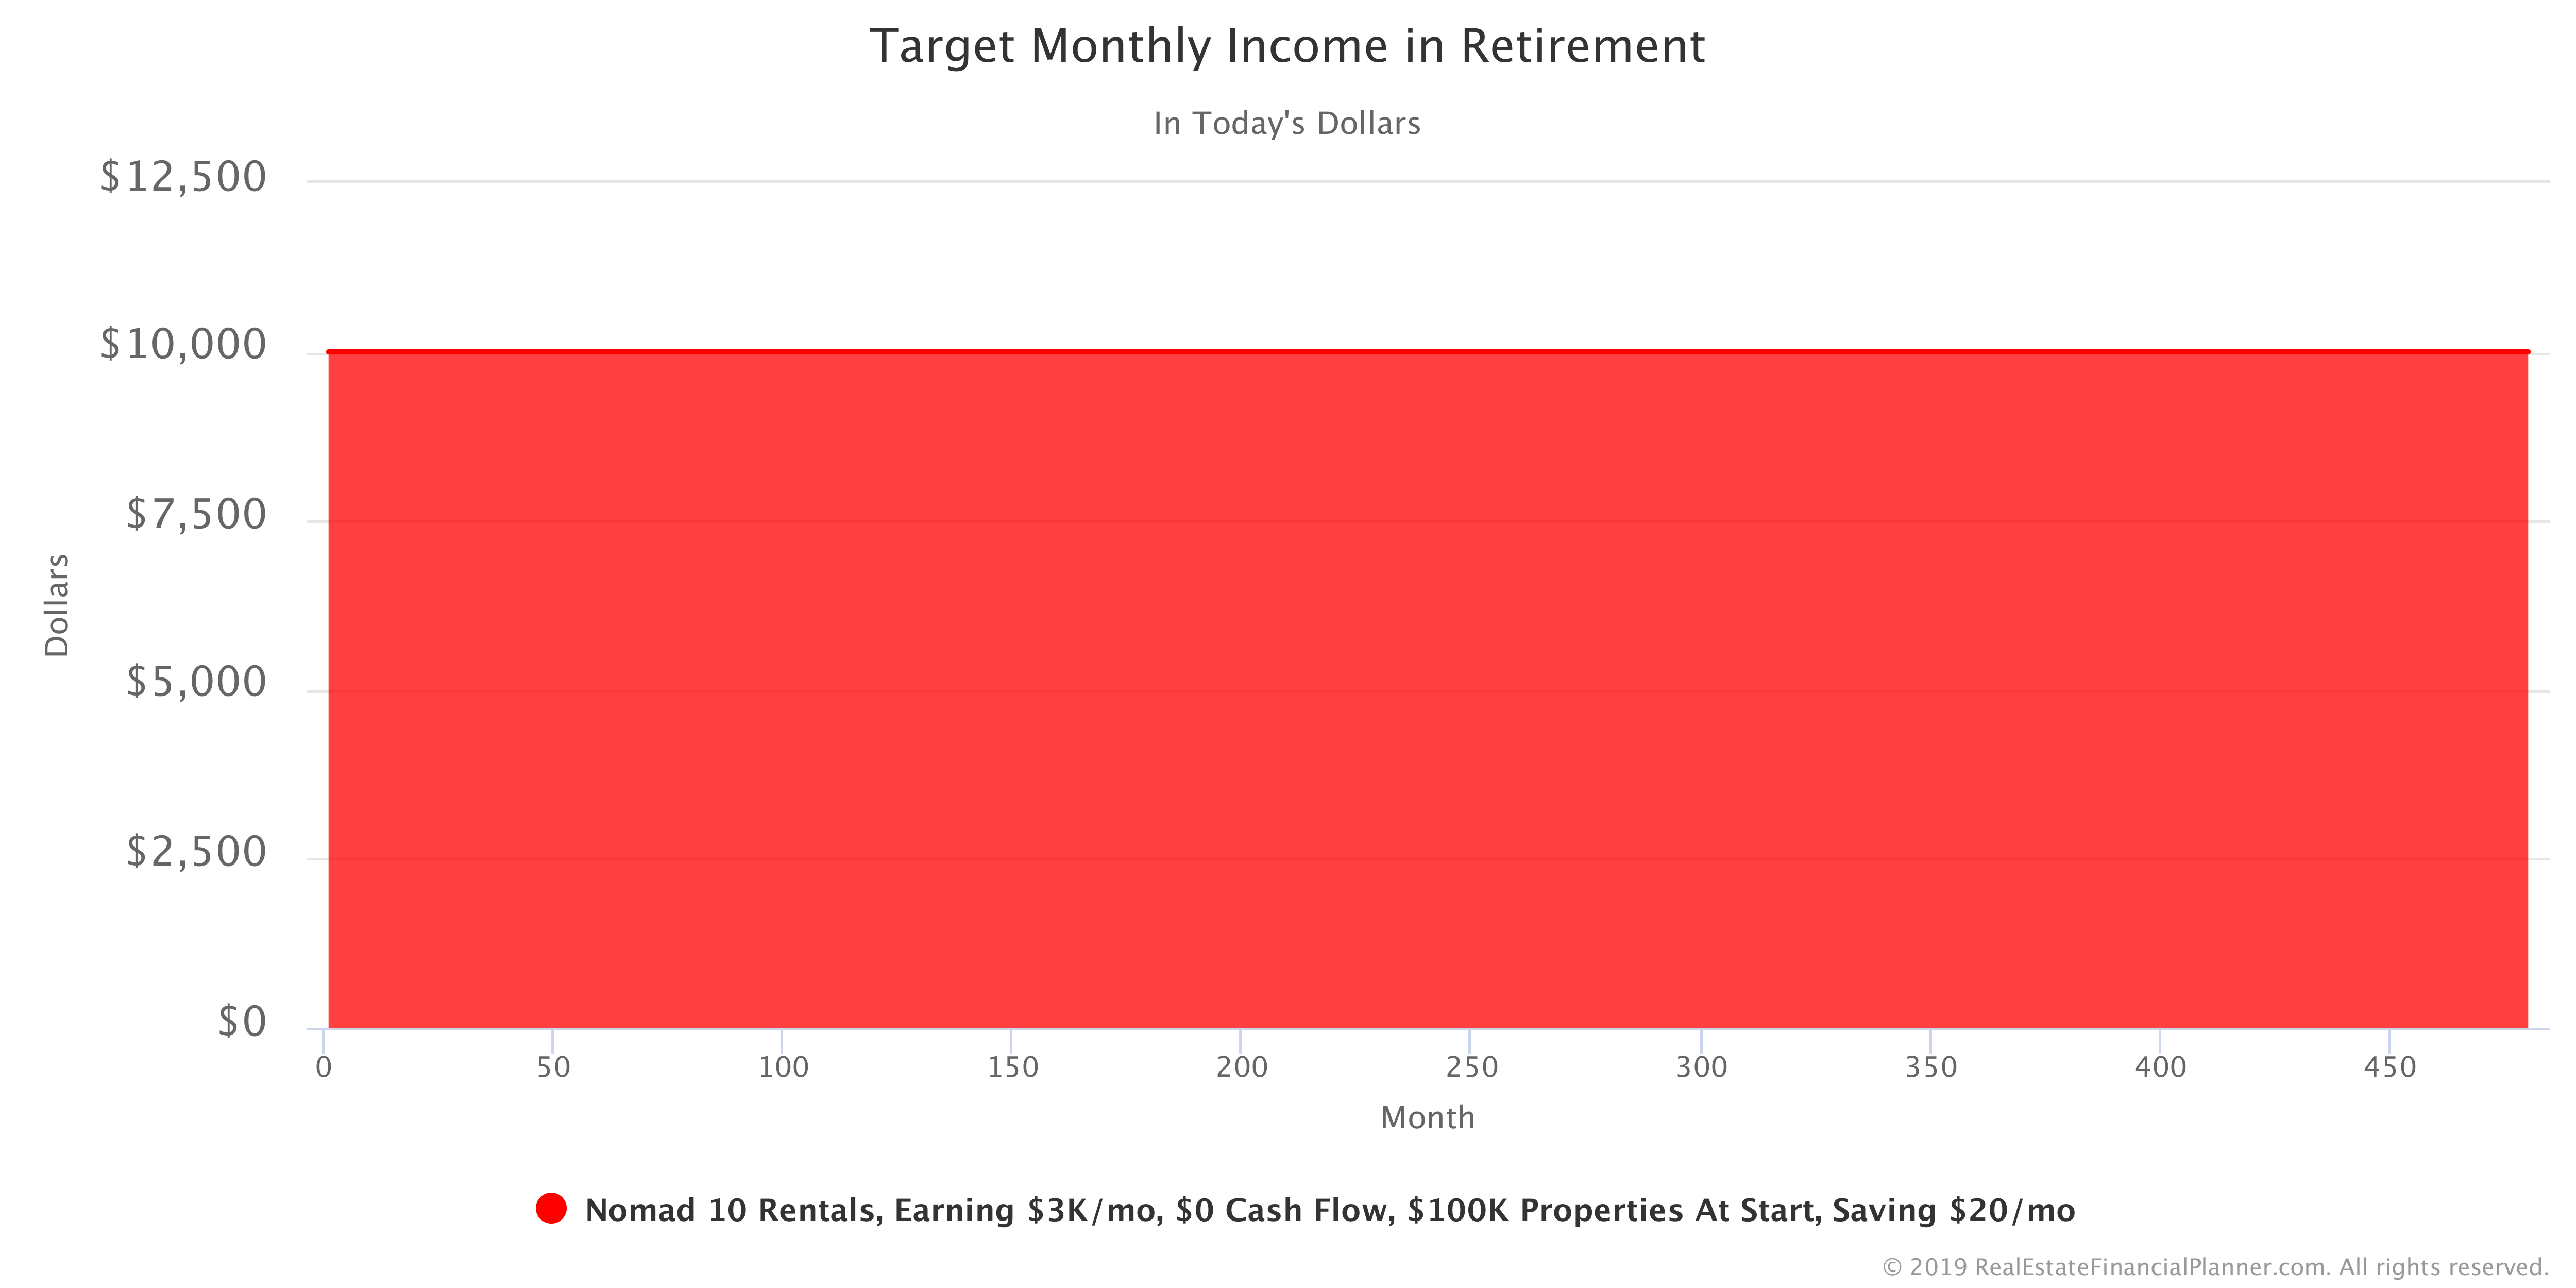 Target Monthly Income in Retirement